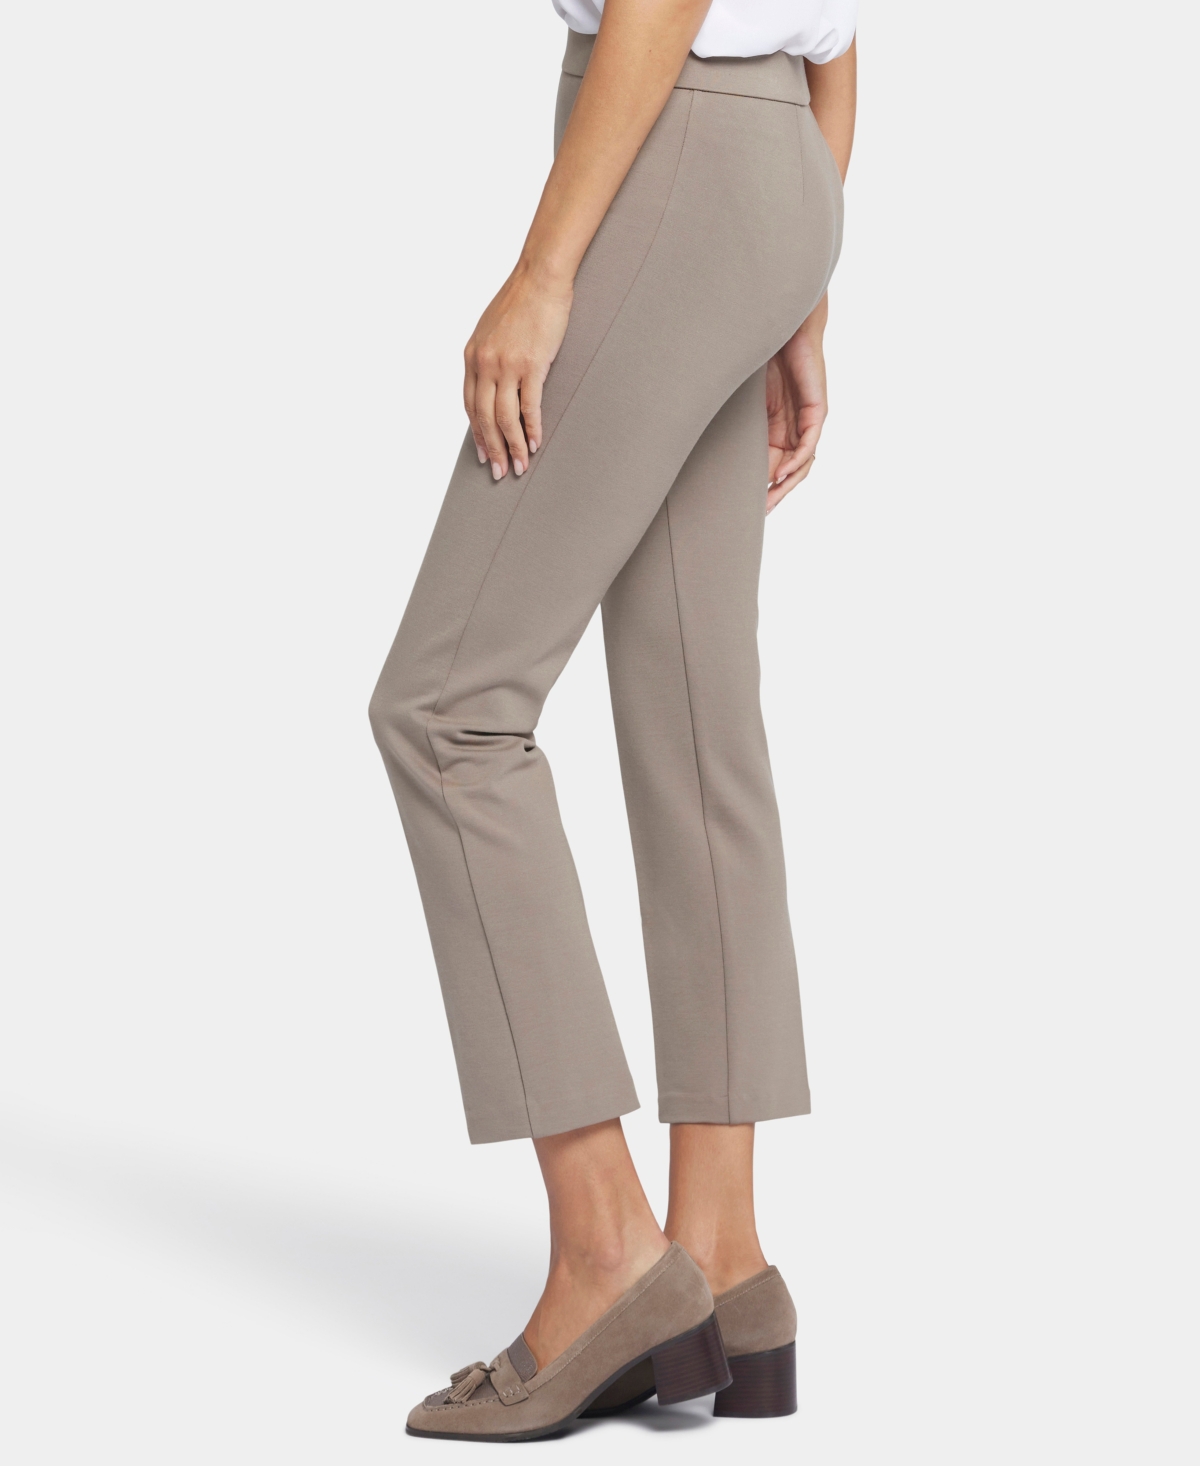 Shop Nydj Women's Pull On Slim Ankle Trouser Pants In Saddlewood